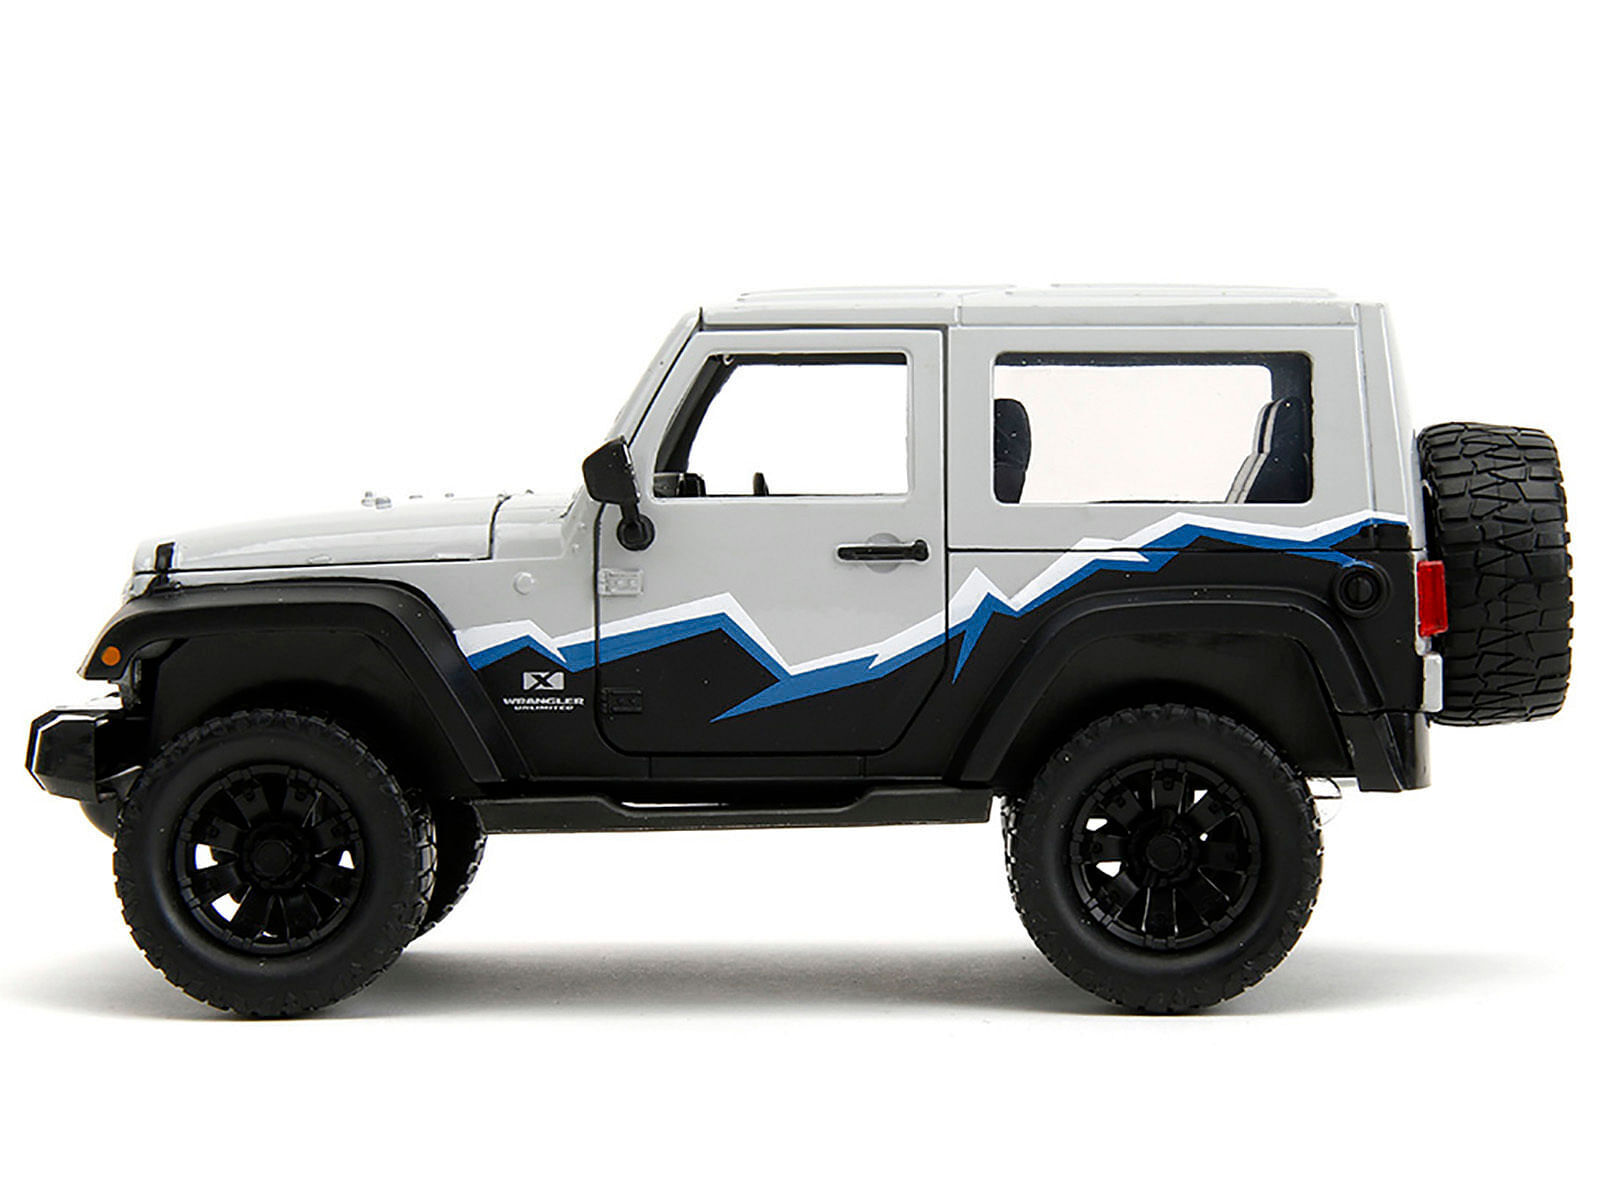 2007 Jeep Wrangler Gray and Black with Blue and White Stripes with Extra Wheels